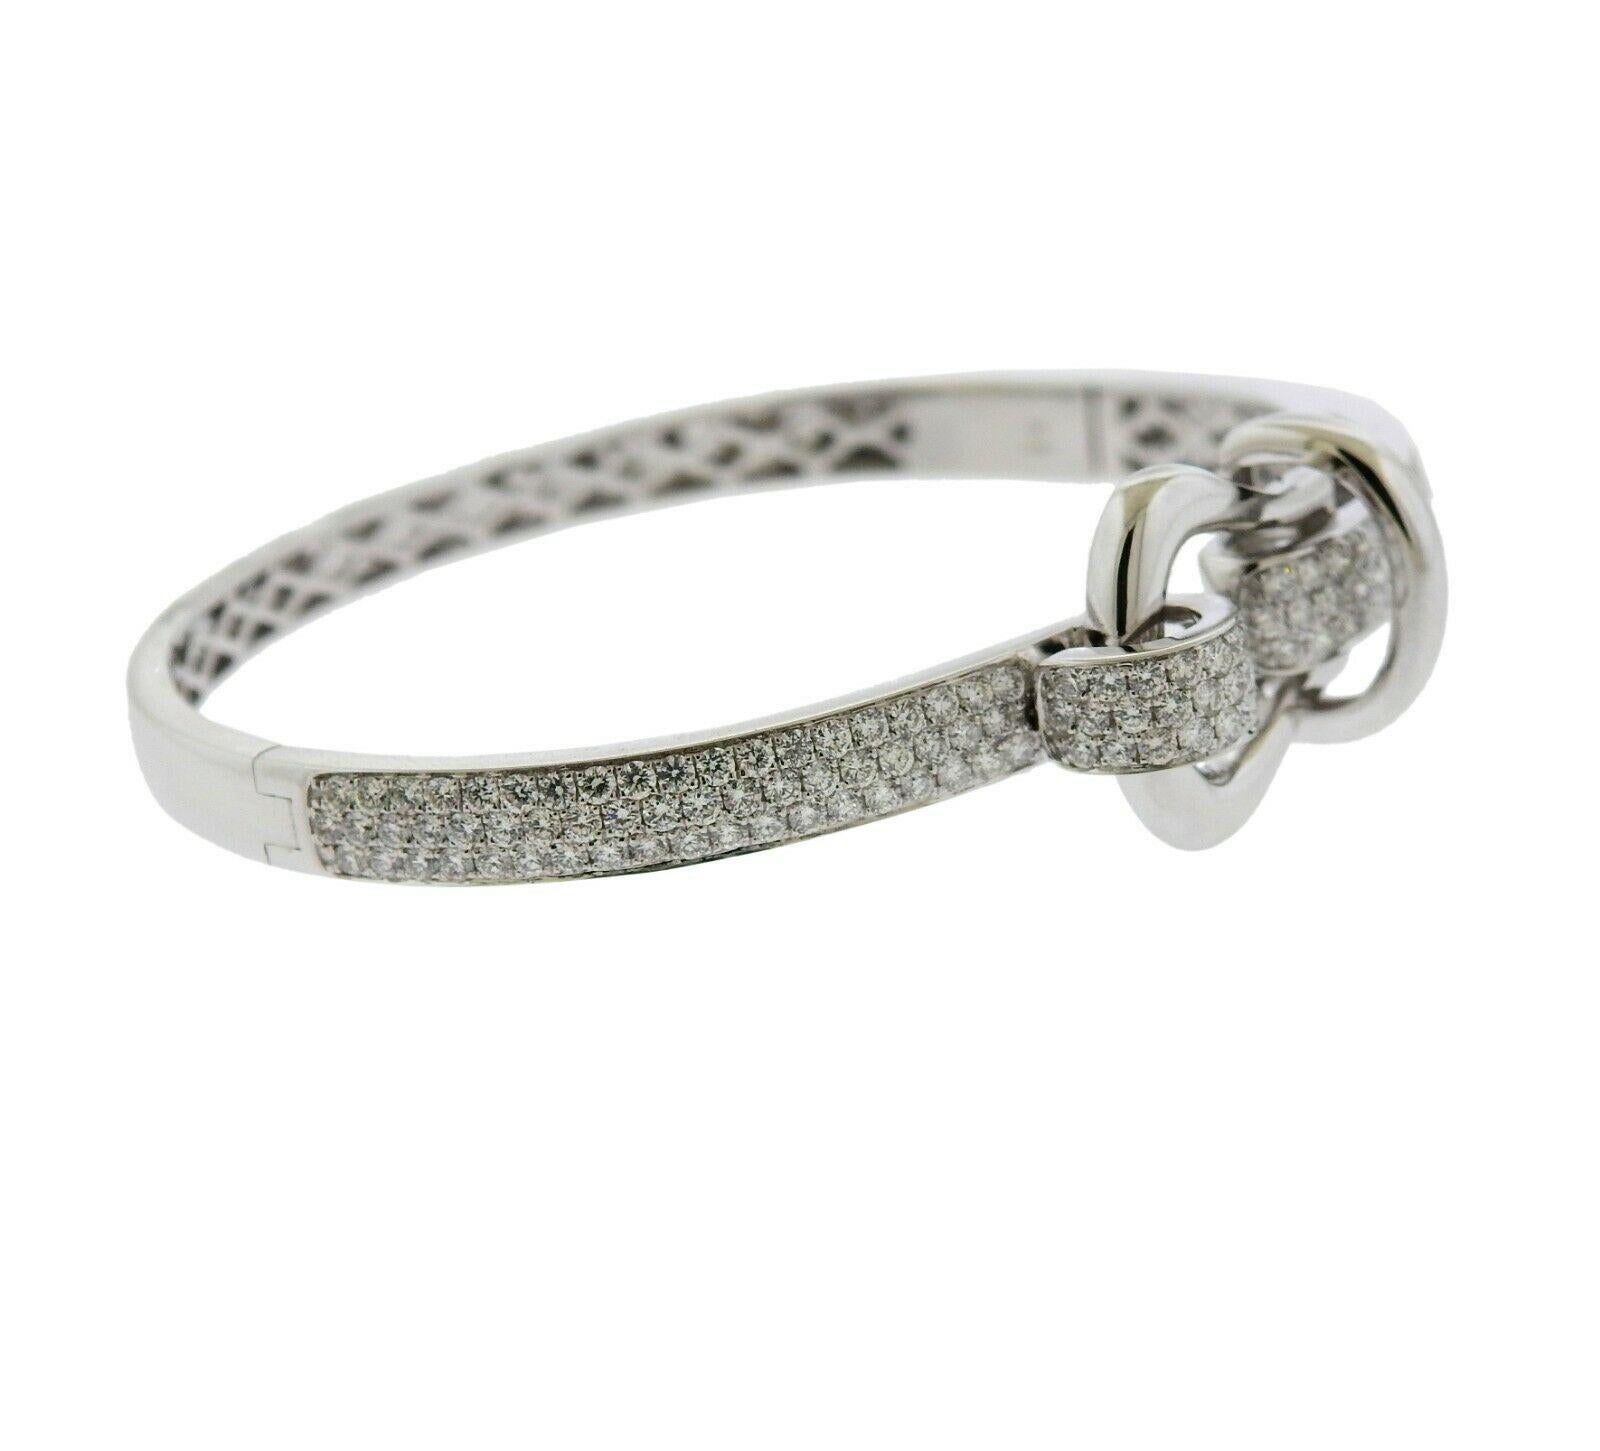 18k white gold bracelet featuring approximately 2.80ctw of G/VS diamonds. Retail is $11,480. Bracelet will fit approx. 7